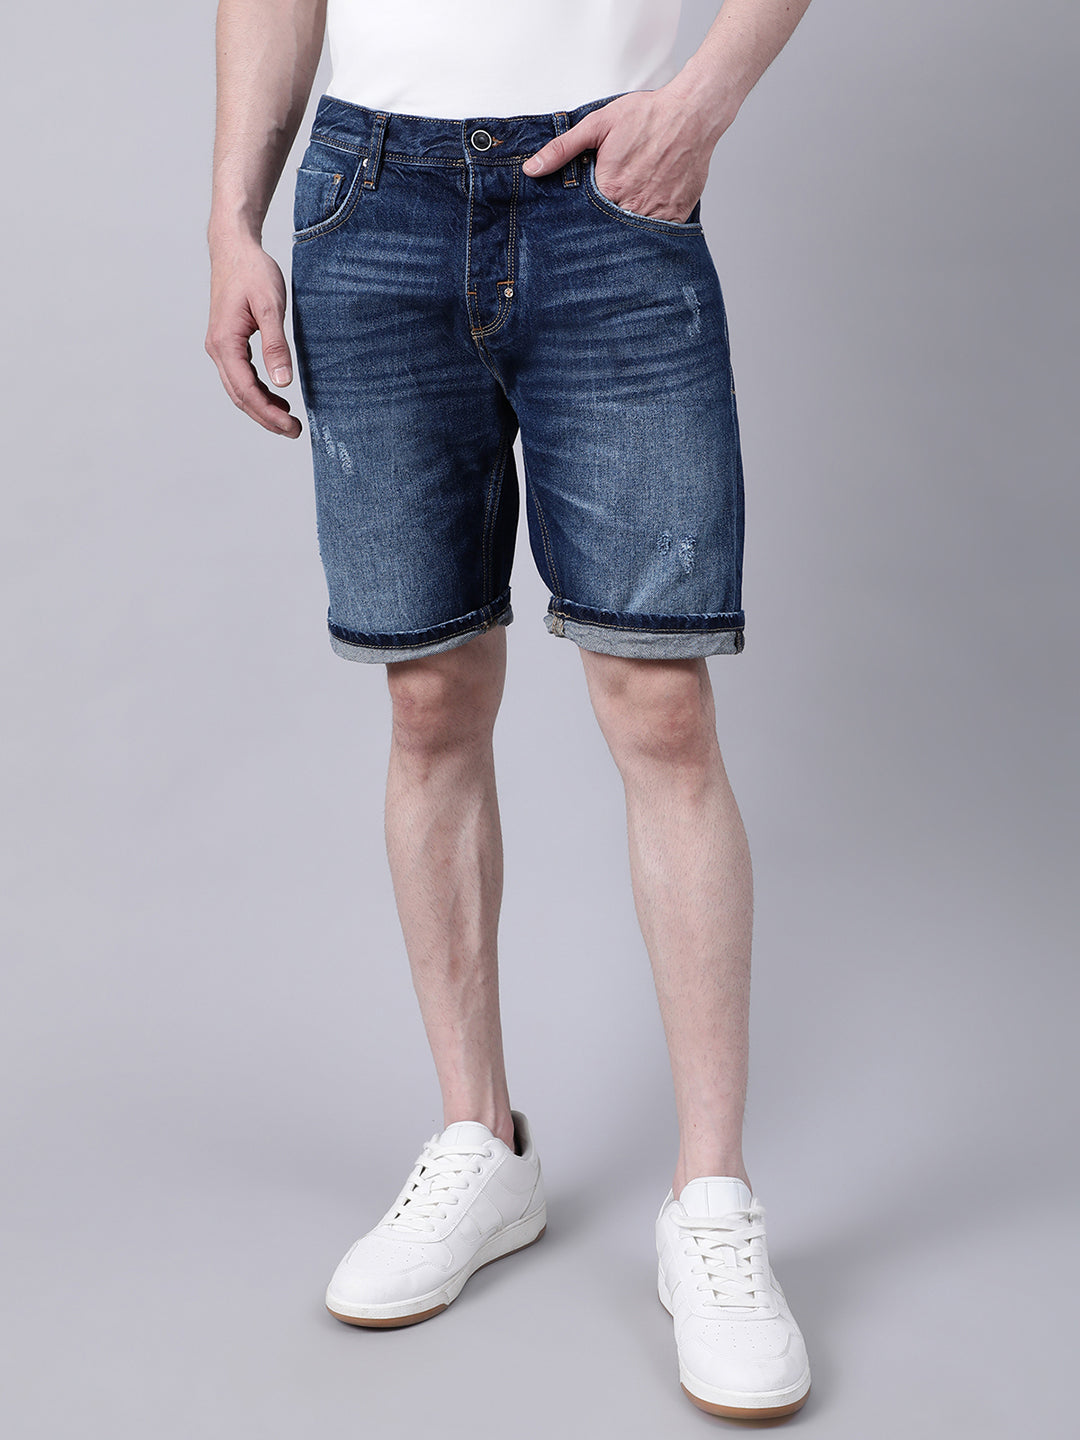 Blue Loose Baggy Denim Jeans For Men Plus Size, Fashionable Streetwear With  Hip Hop Style, Long 3/4 Cargo Denim Cargo Shorts, Pocket And Bermuda Design  From Cutee, $37.83 | DHgate.Com